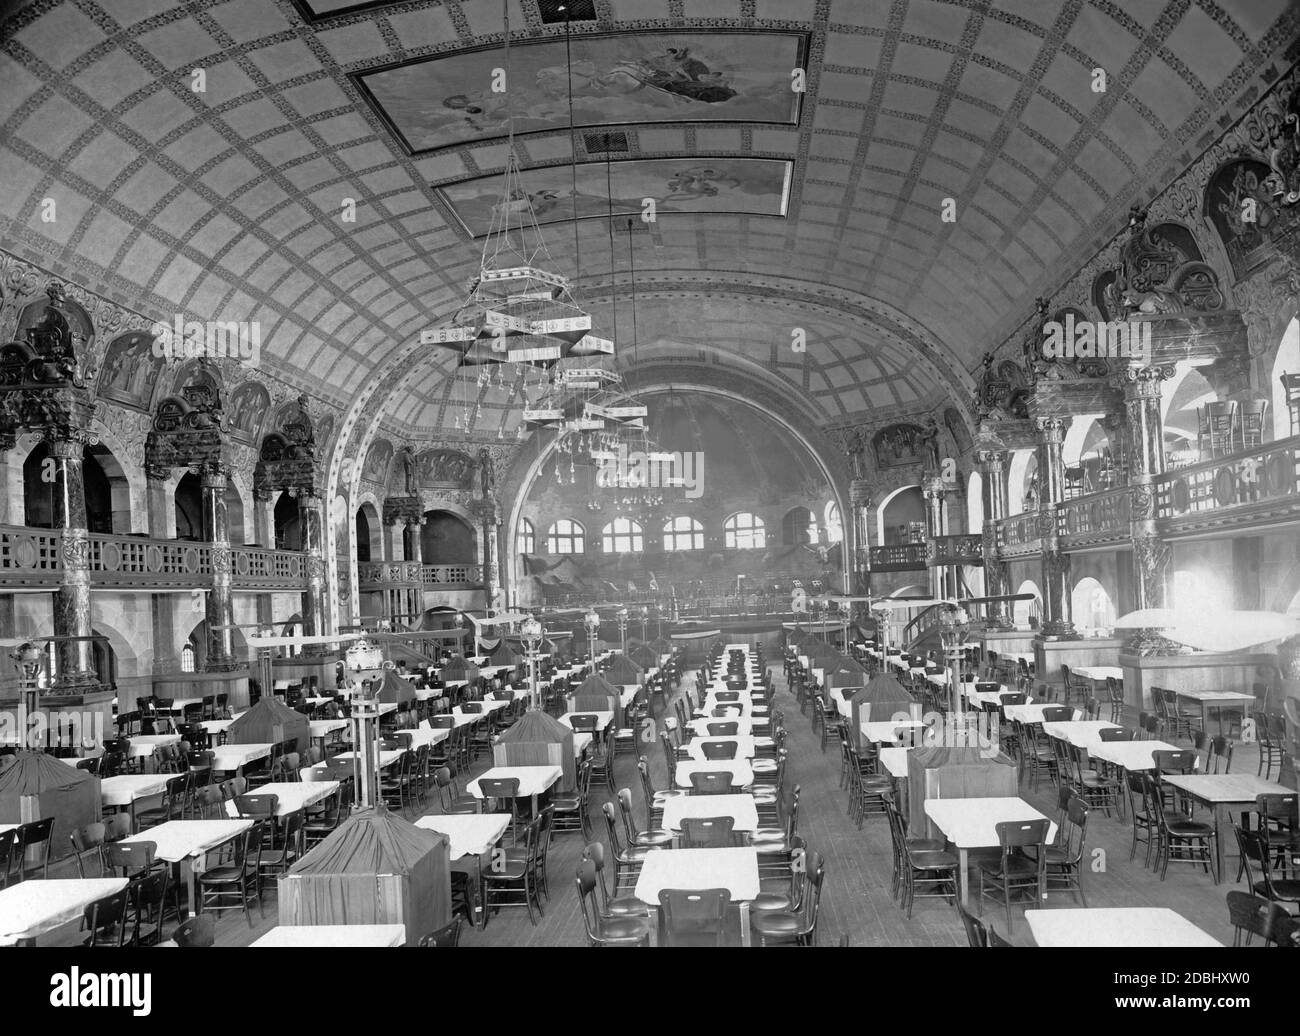 'The Knights' Hall in the ''German-Tyrolean Alps'' at the St. Louis World's Fair (Louisiana Purchase Exposition). In the foreground are rows of tables, in the background the orchestra stage.' Stock Photo